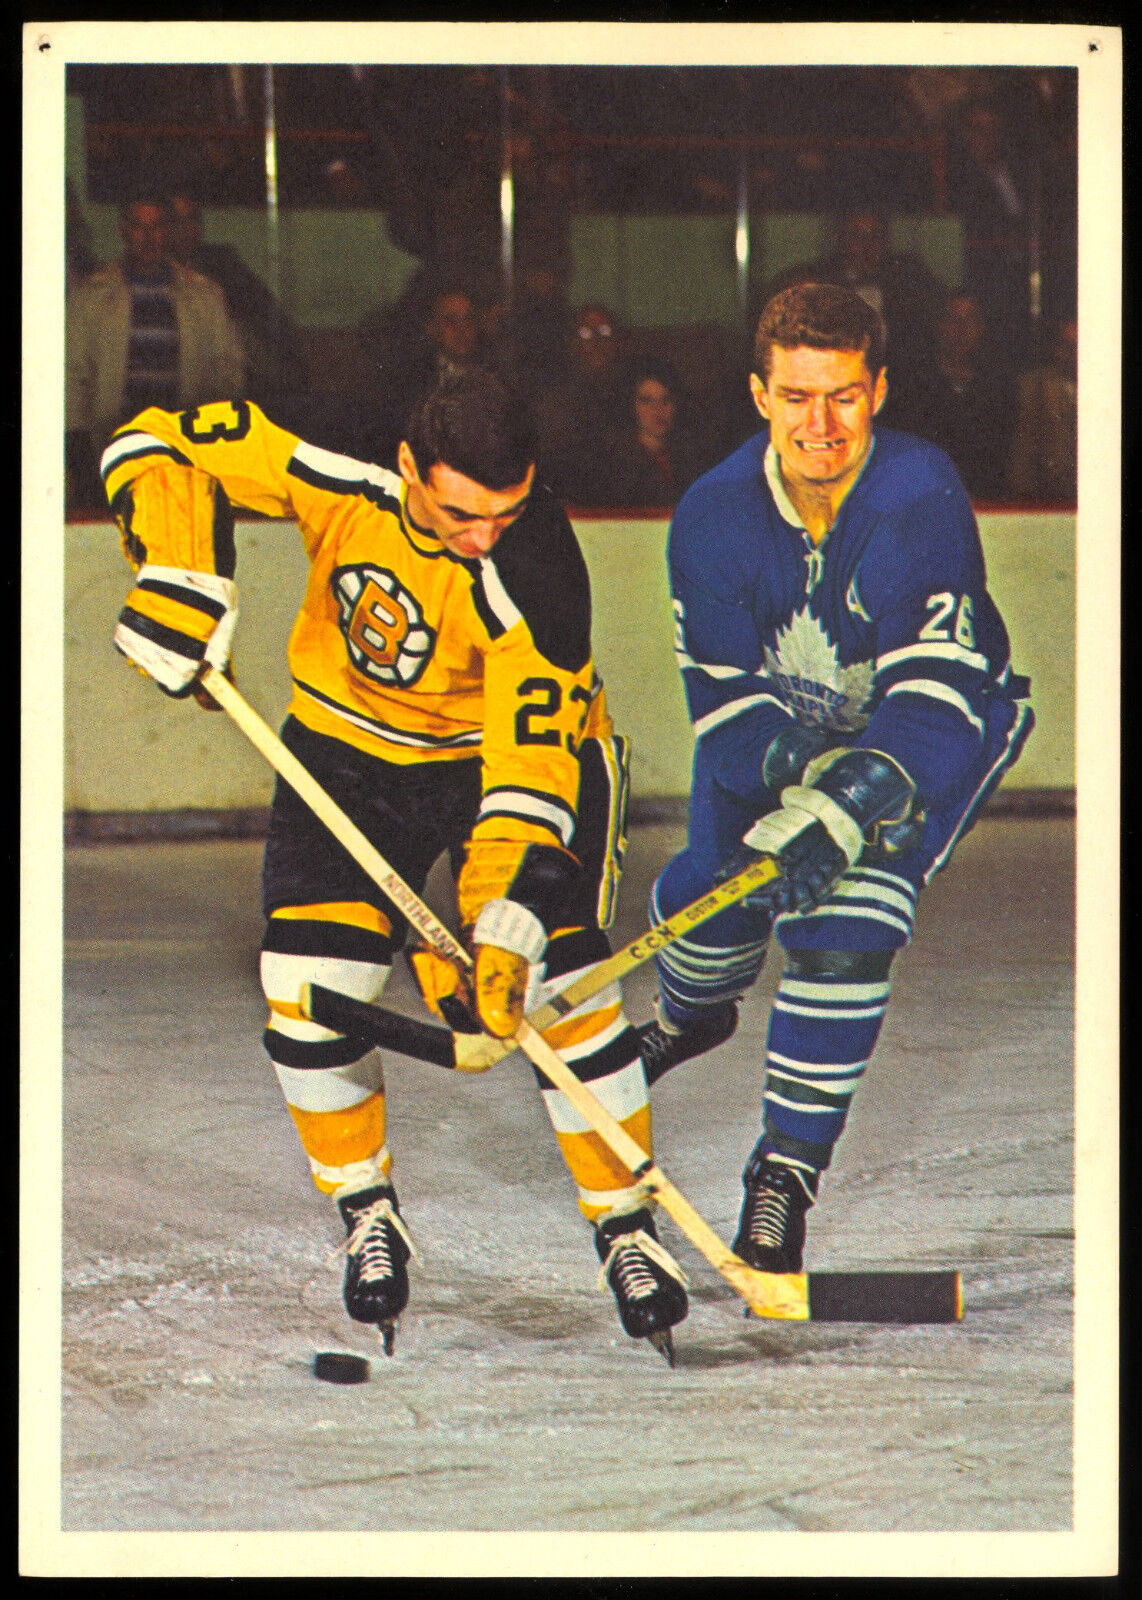 1963-64 TORONTO STARS IN ACTION JEAN GUY GENDRON BOSTON BRUINS HOCKEY Photo Poster painting CARD